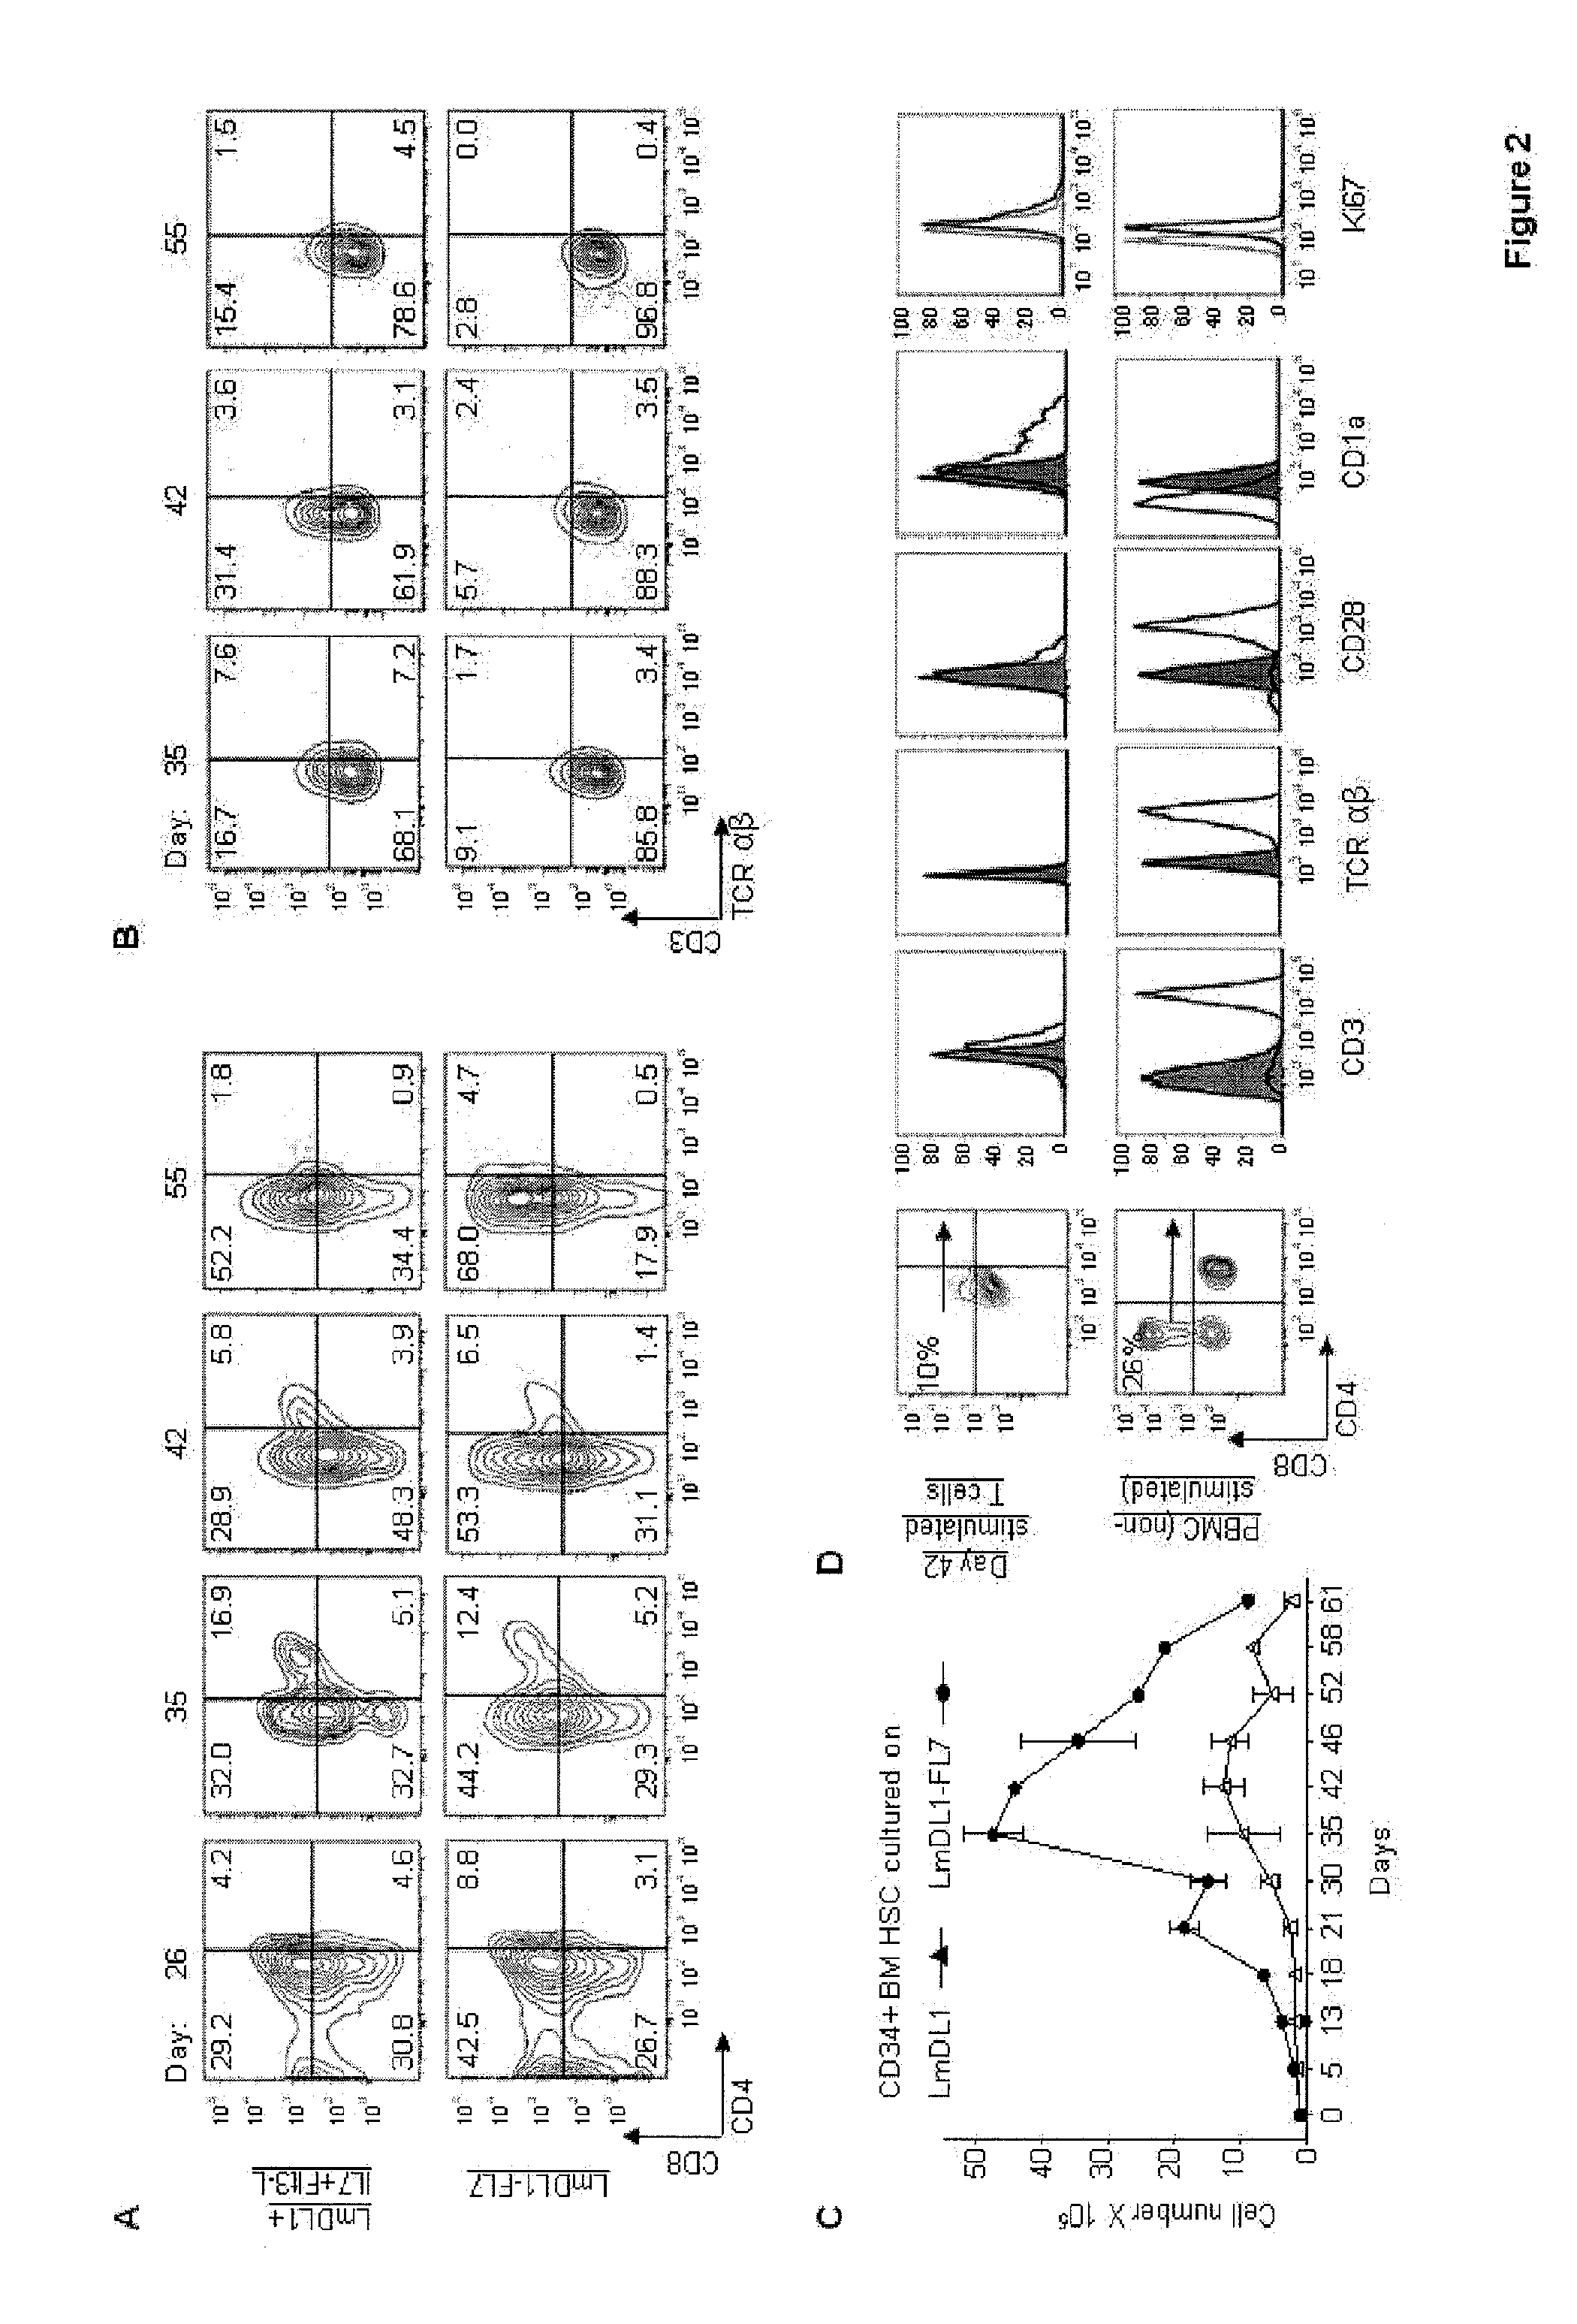 System and method for producing t cells